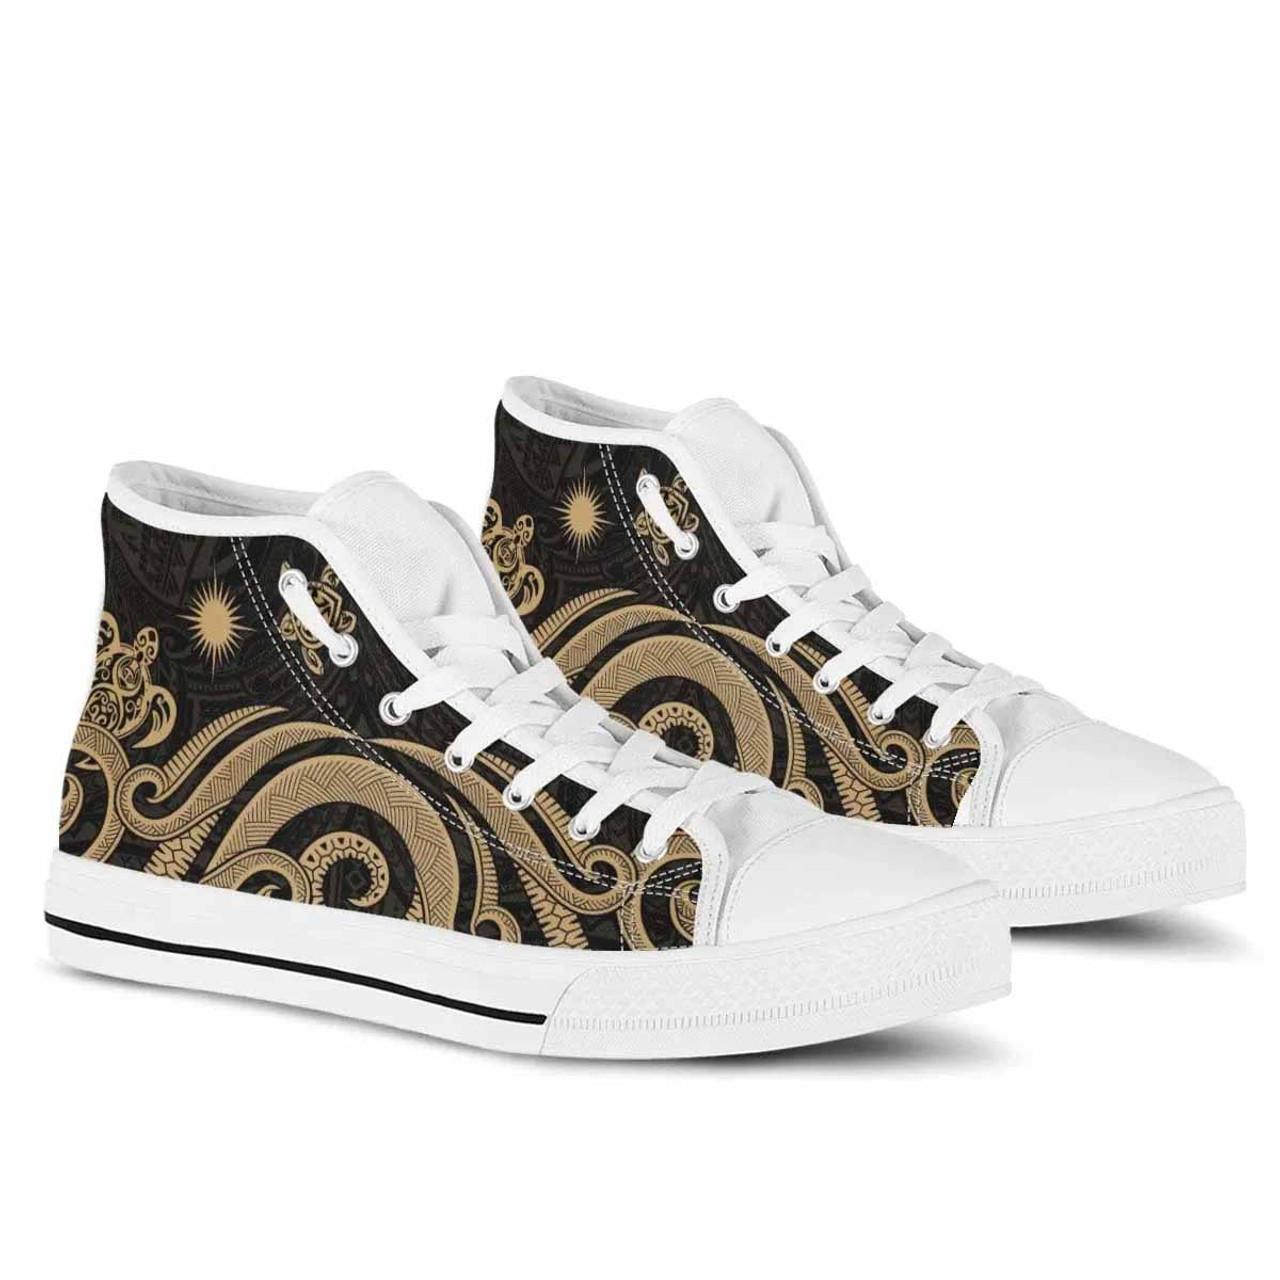 Marshall Islands High Top Shoes - Gold Tentacle Turtle 8